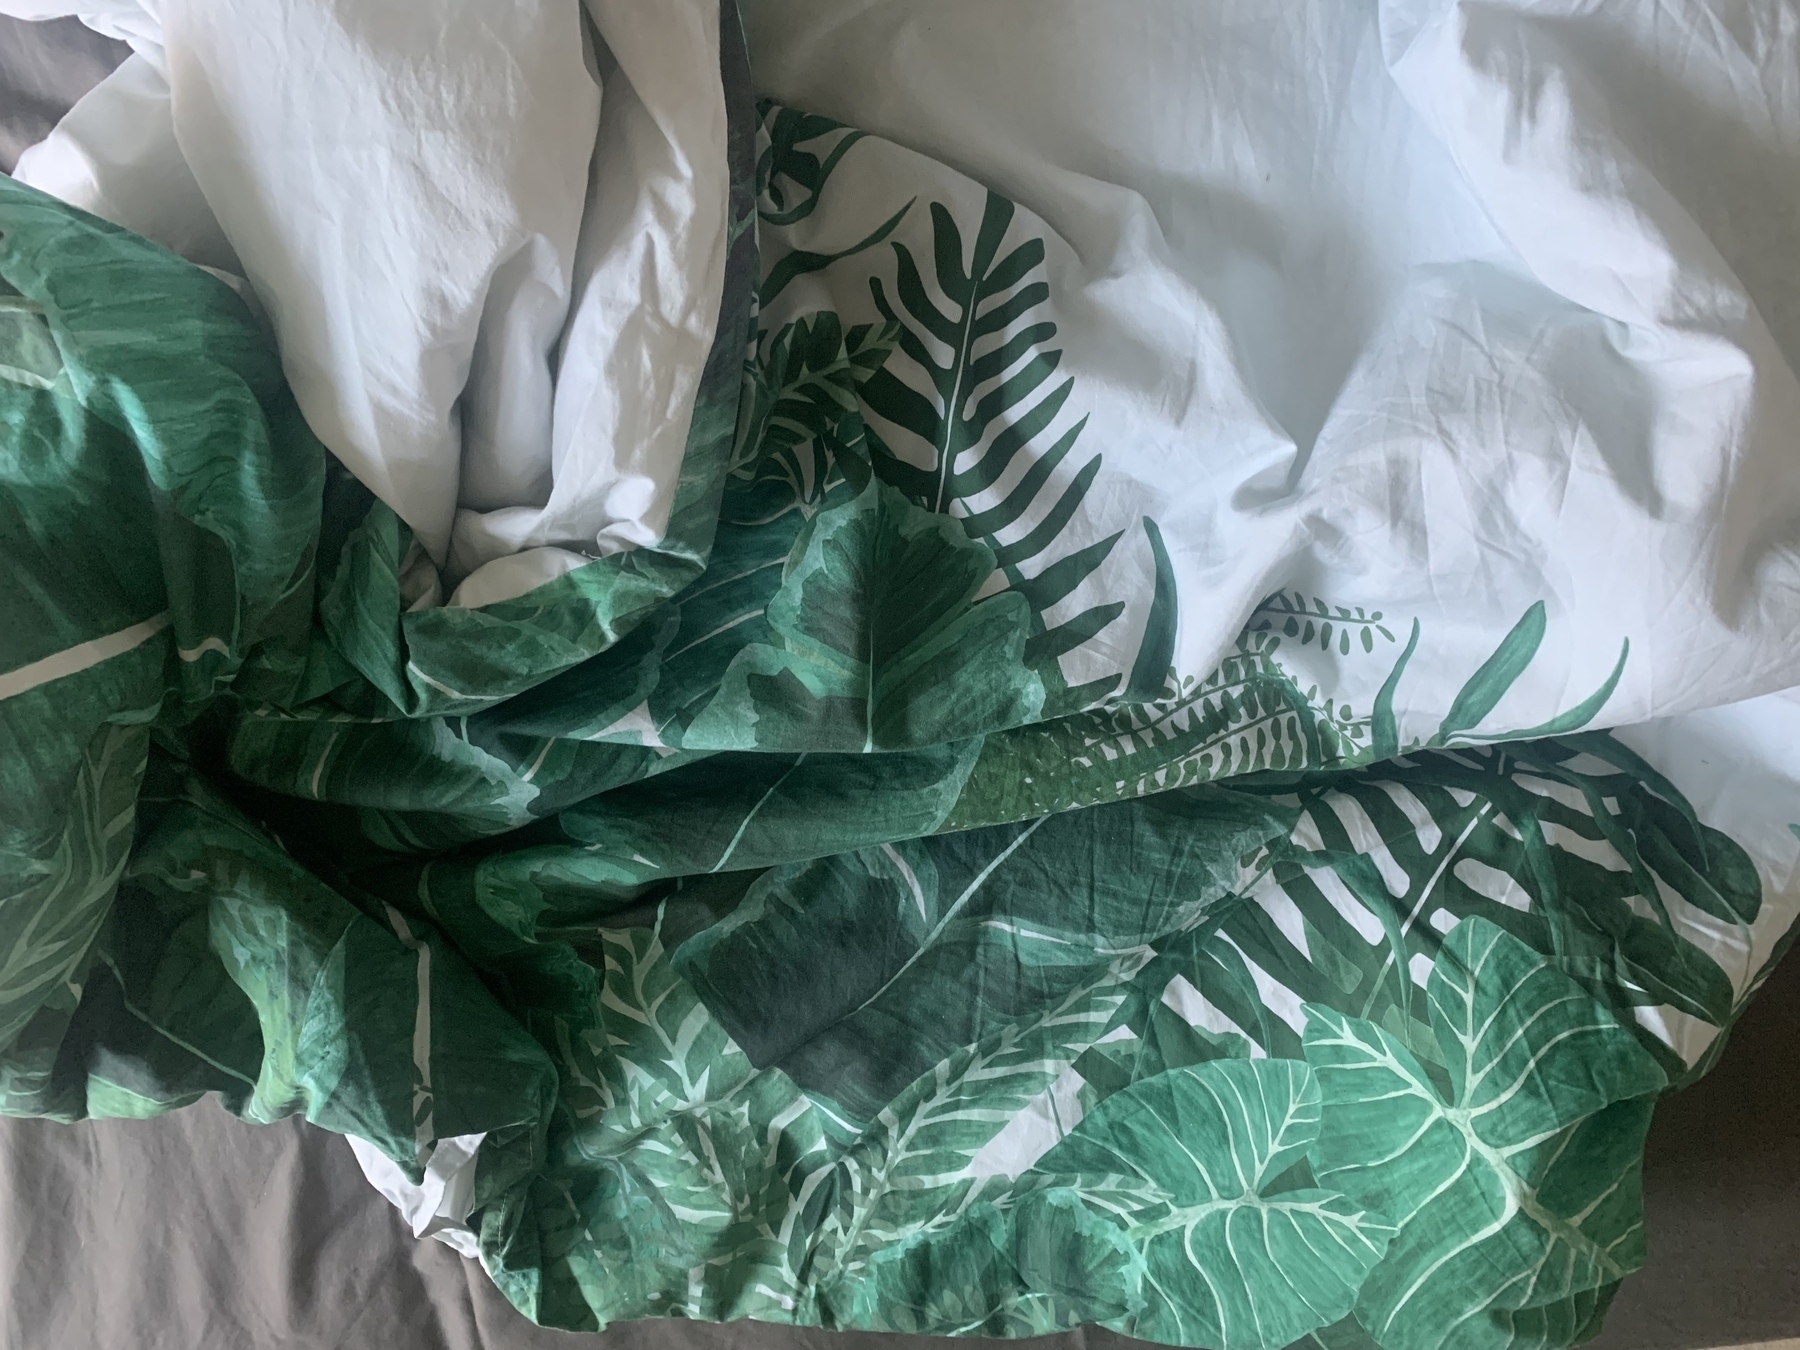 Rumpled duvet. The cover is light grey with green tropical leaf pattern.